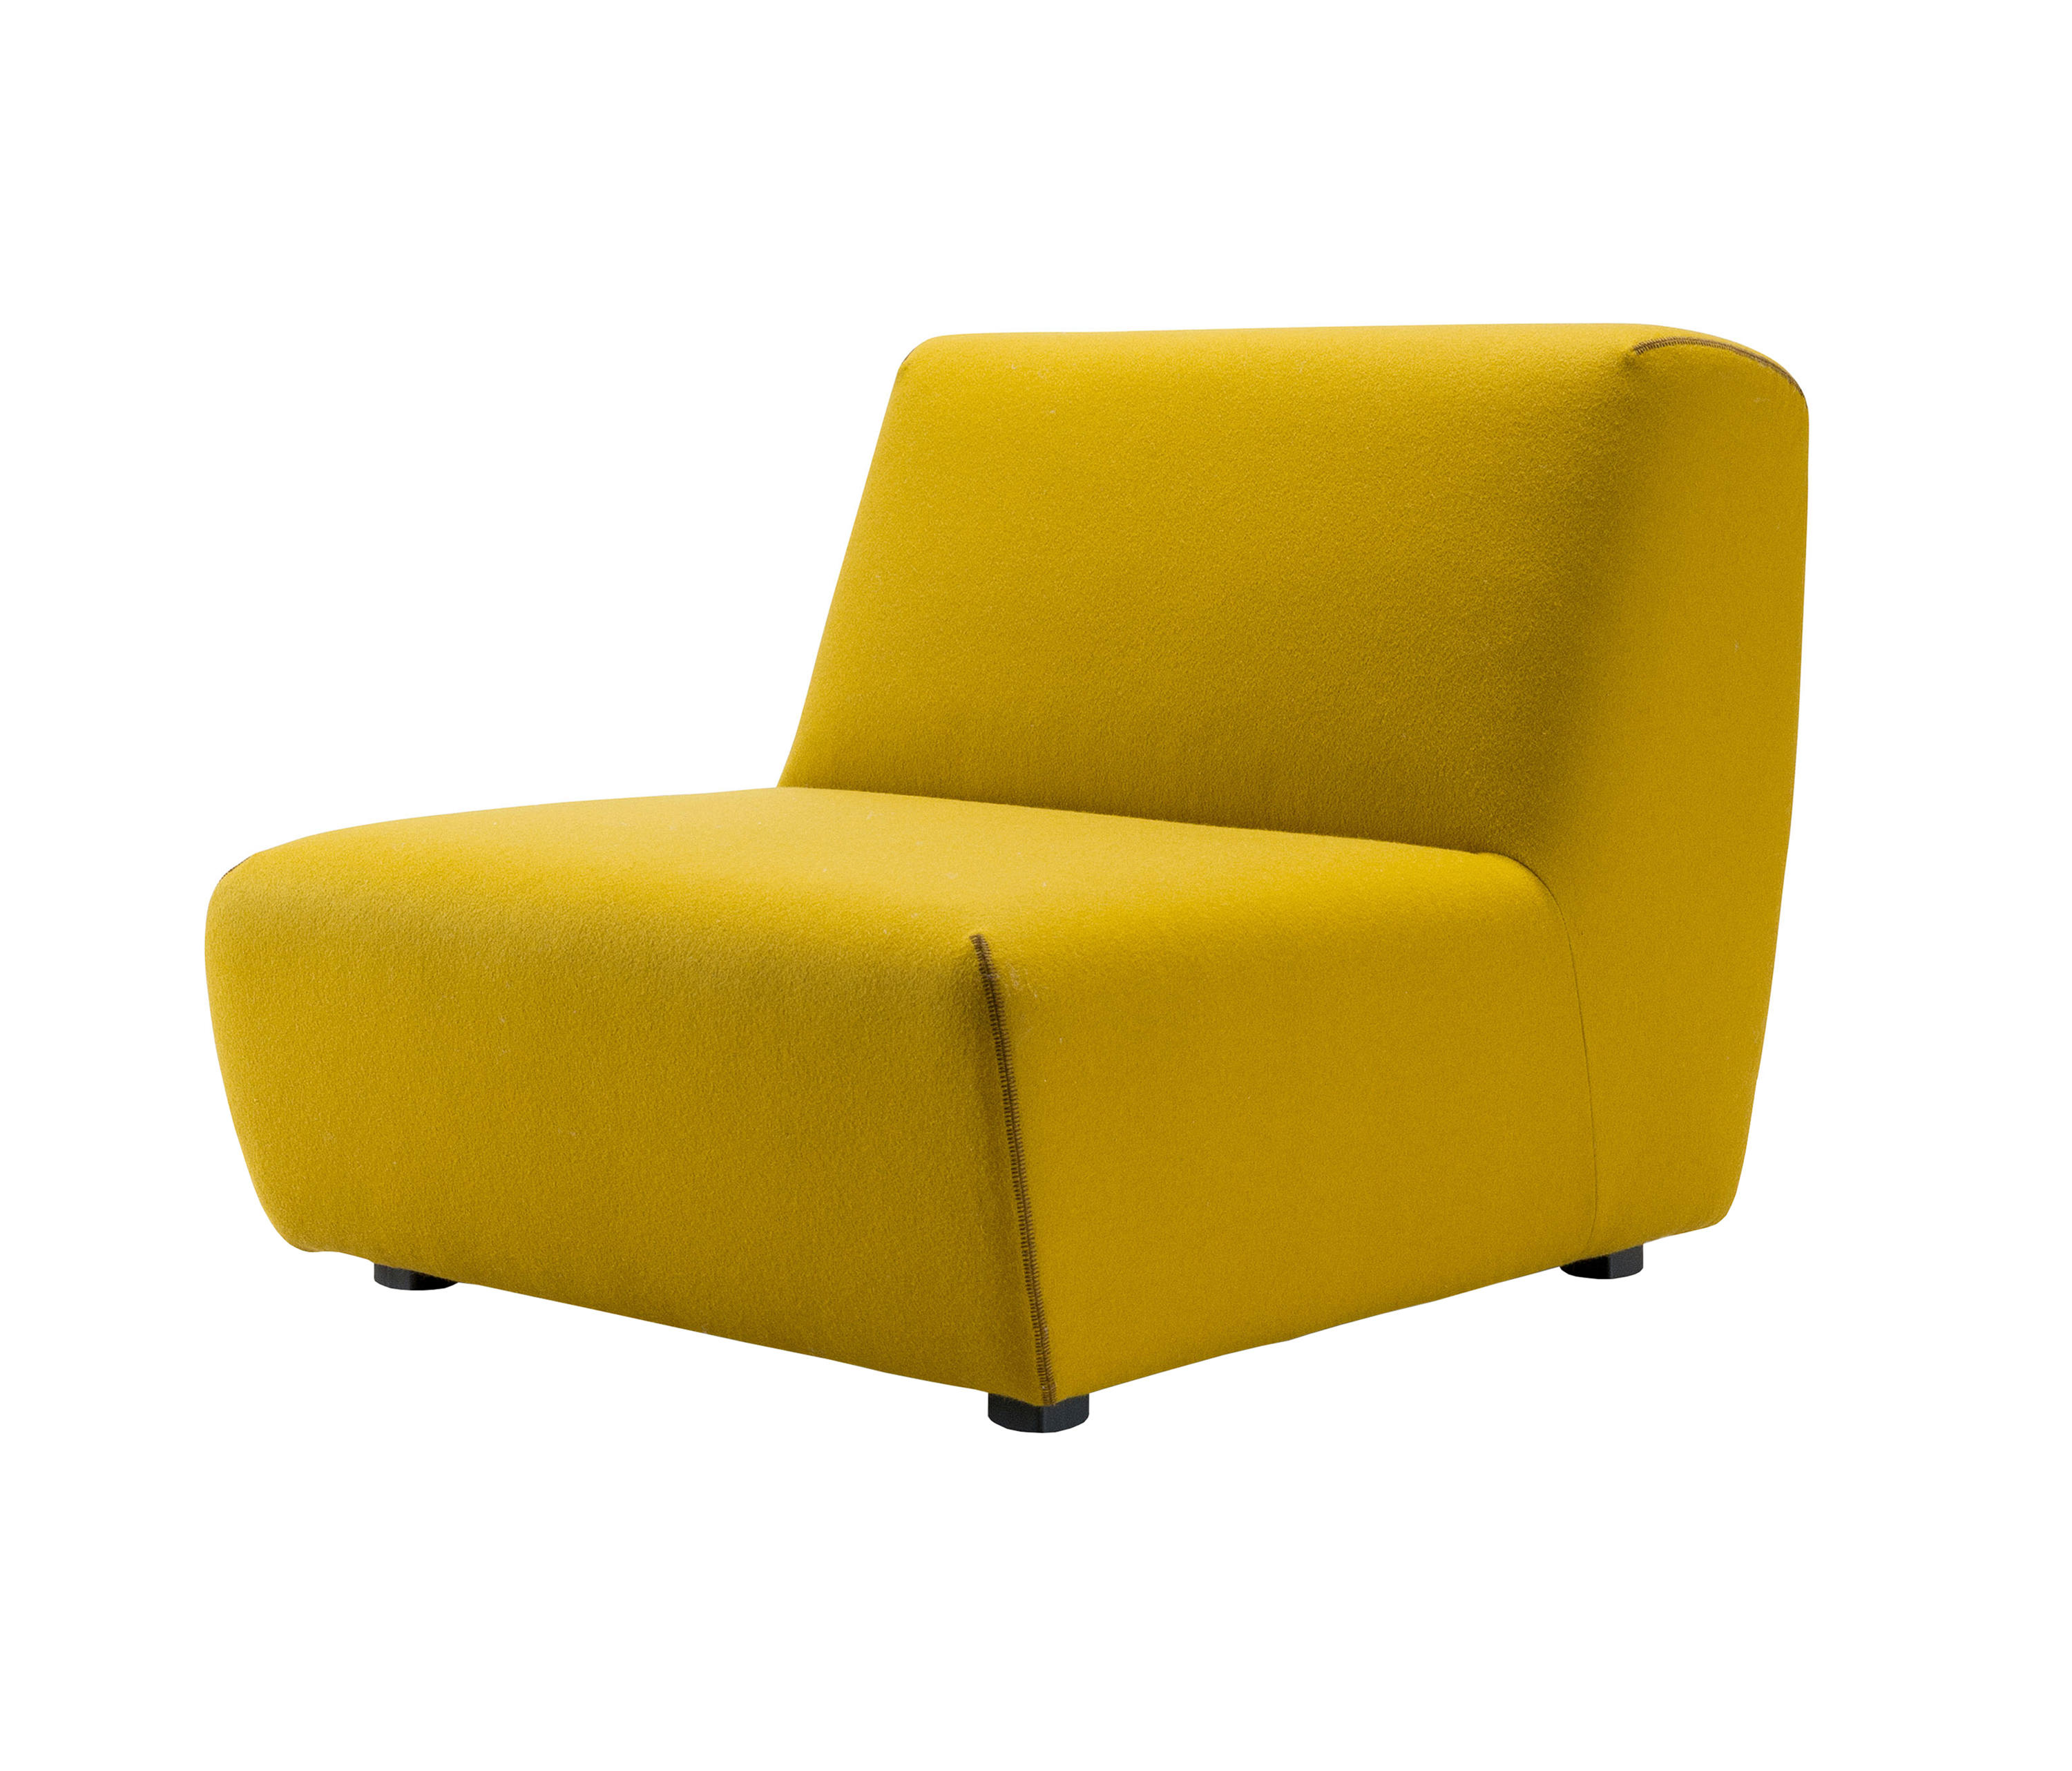 W - Armchairs from Sedes Regia | Architonic